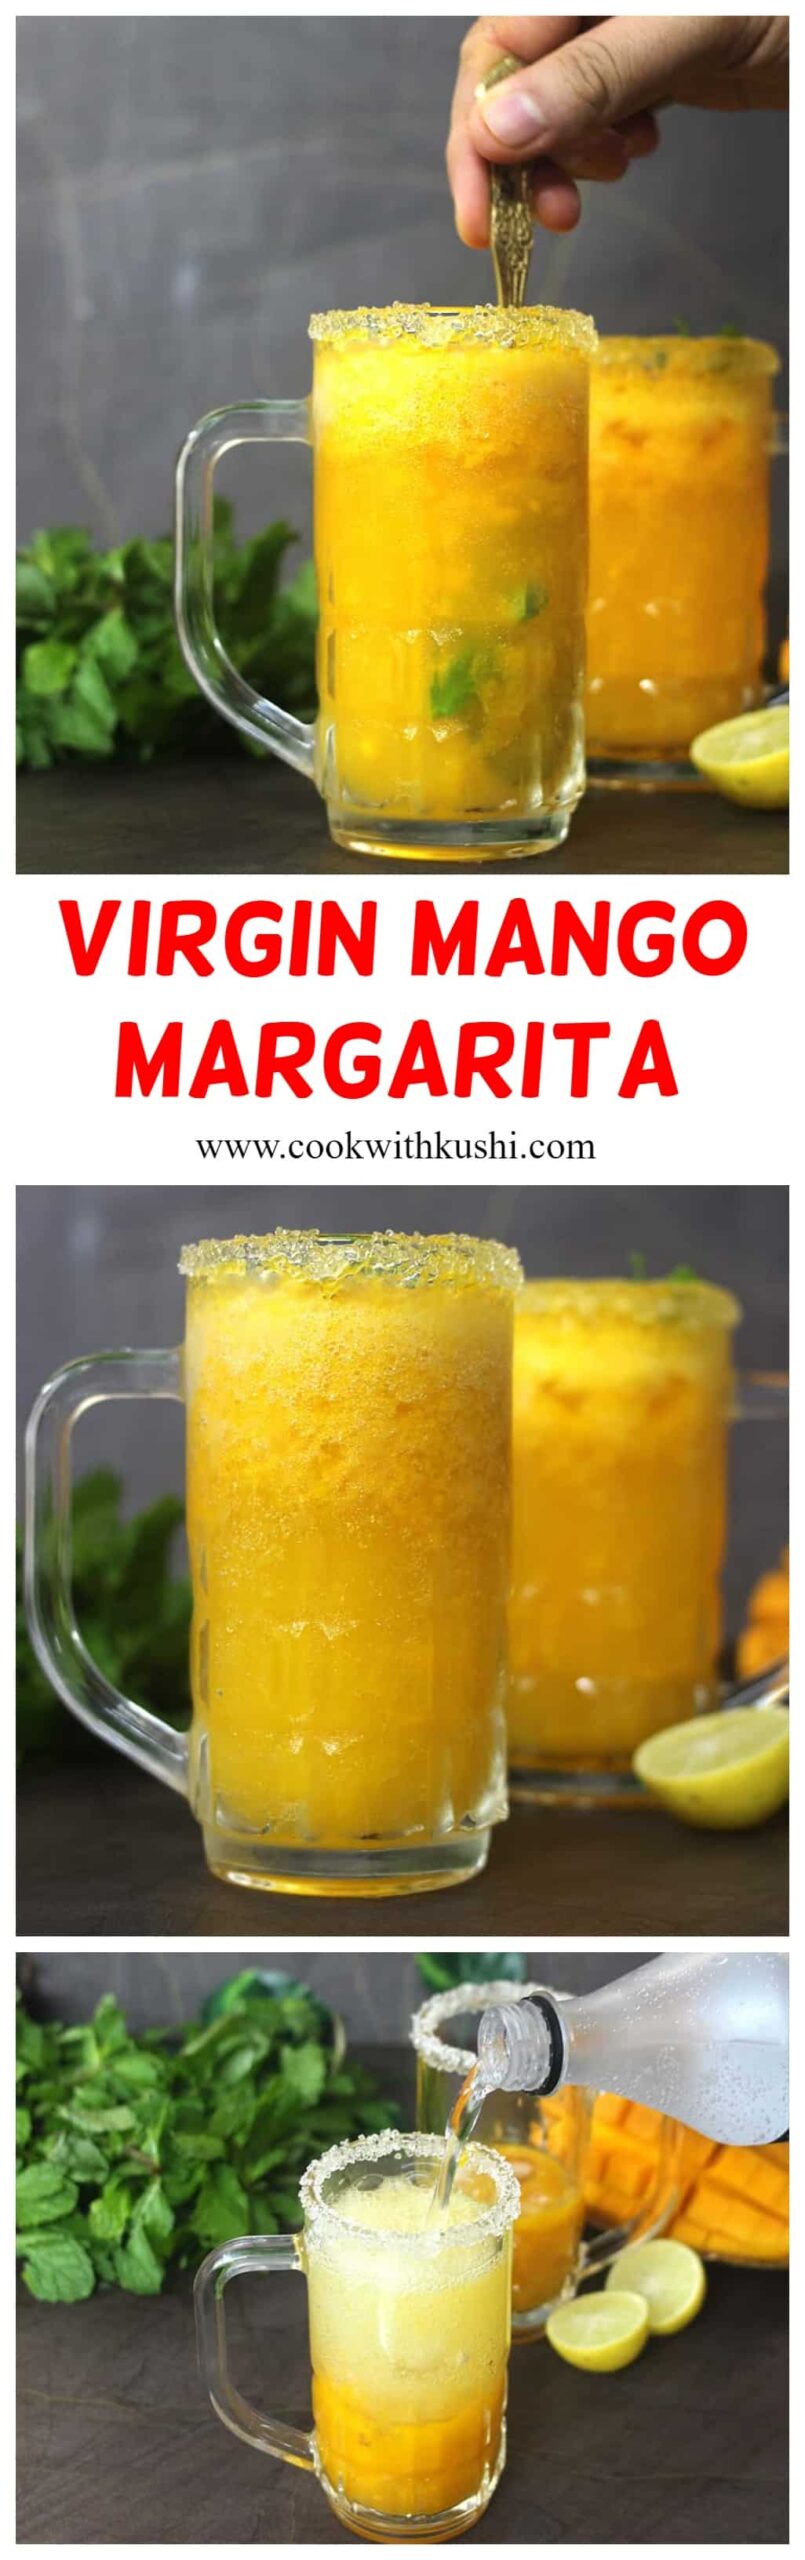 How to make the best mango margarita at home